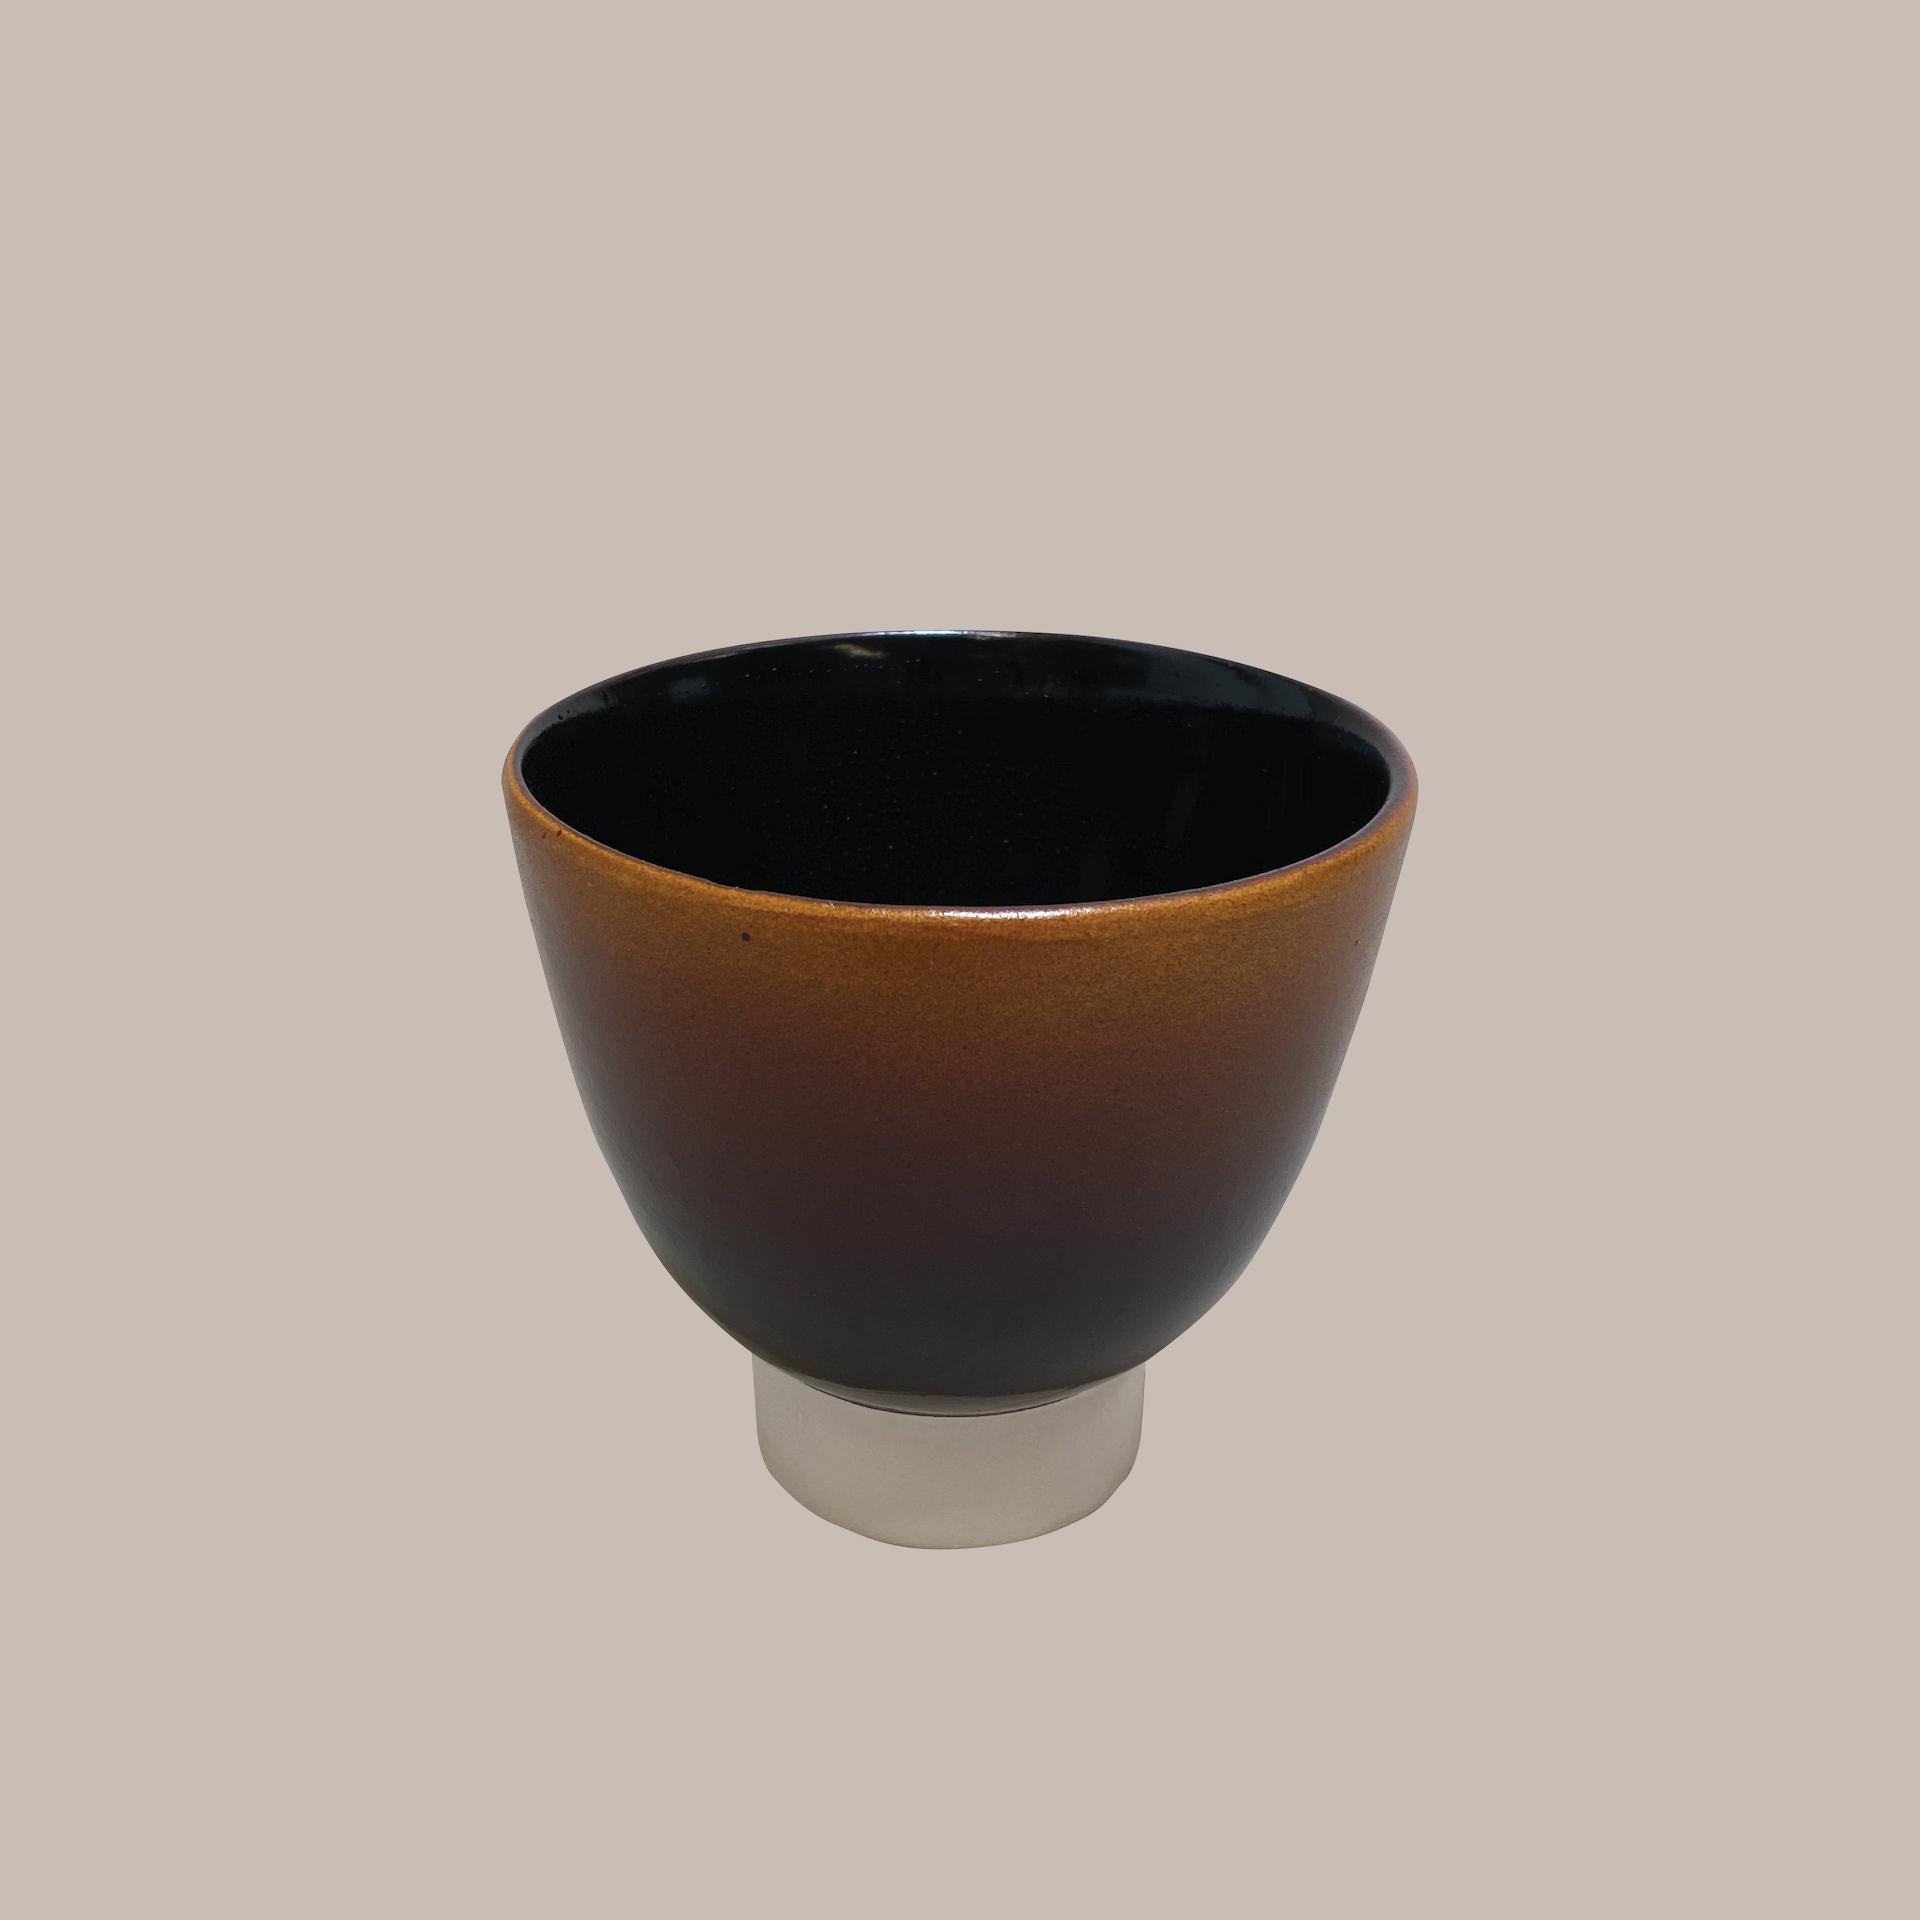 Ott another paradigmatic handmade ceramic cup by Studio Yoon Seok-hyeon
Dimensions: W 10 x H 9 cm
Materials: Ott(Natural resin from Ott tree), porcelain
250g

It is available to customize various colors in Ott's natural color range(Brownish,